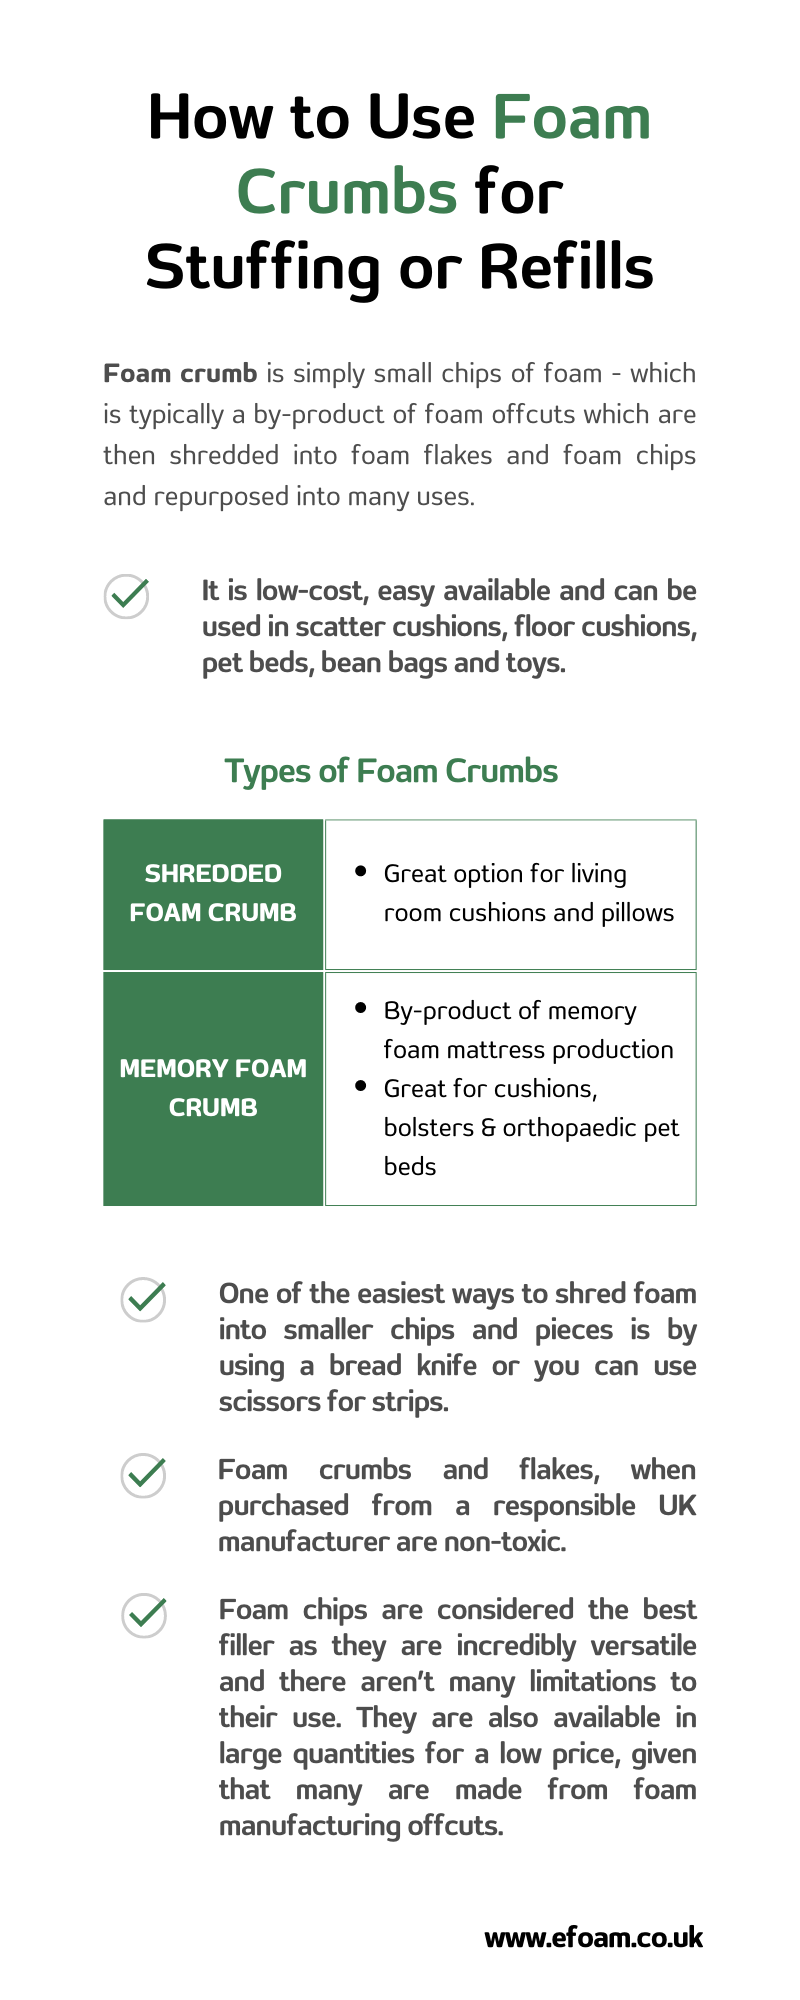 How to Use Foam Crumbs for Stuffing or Refills